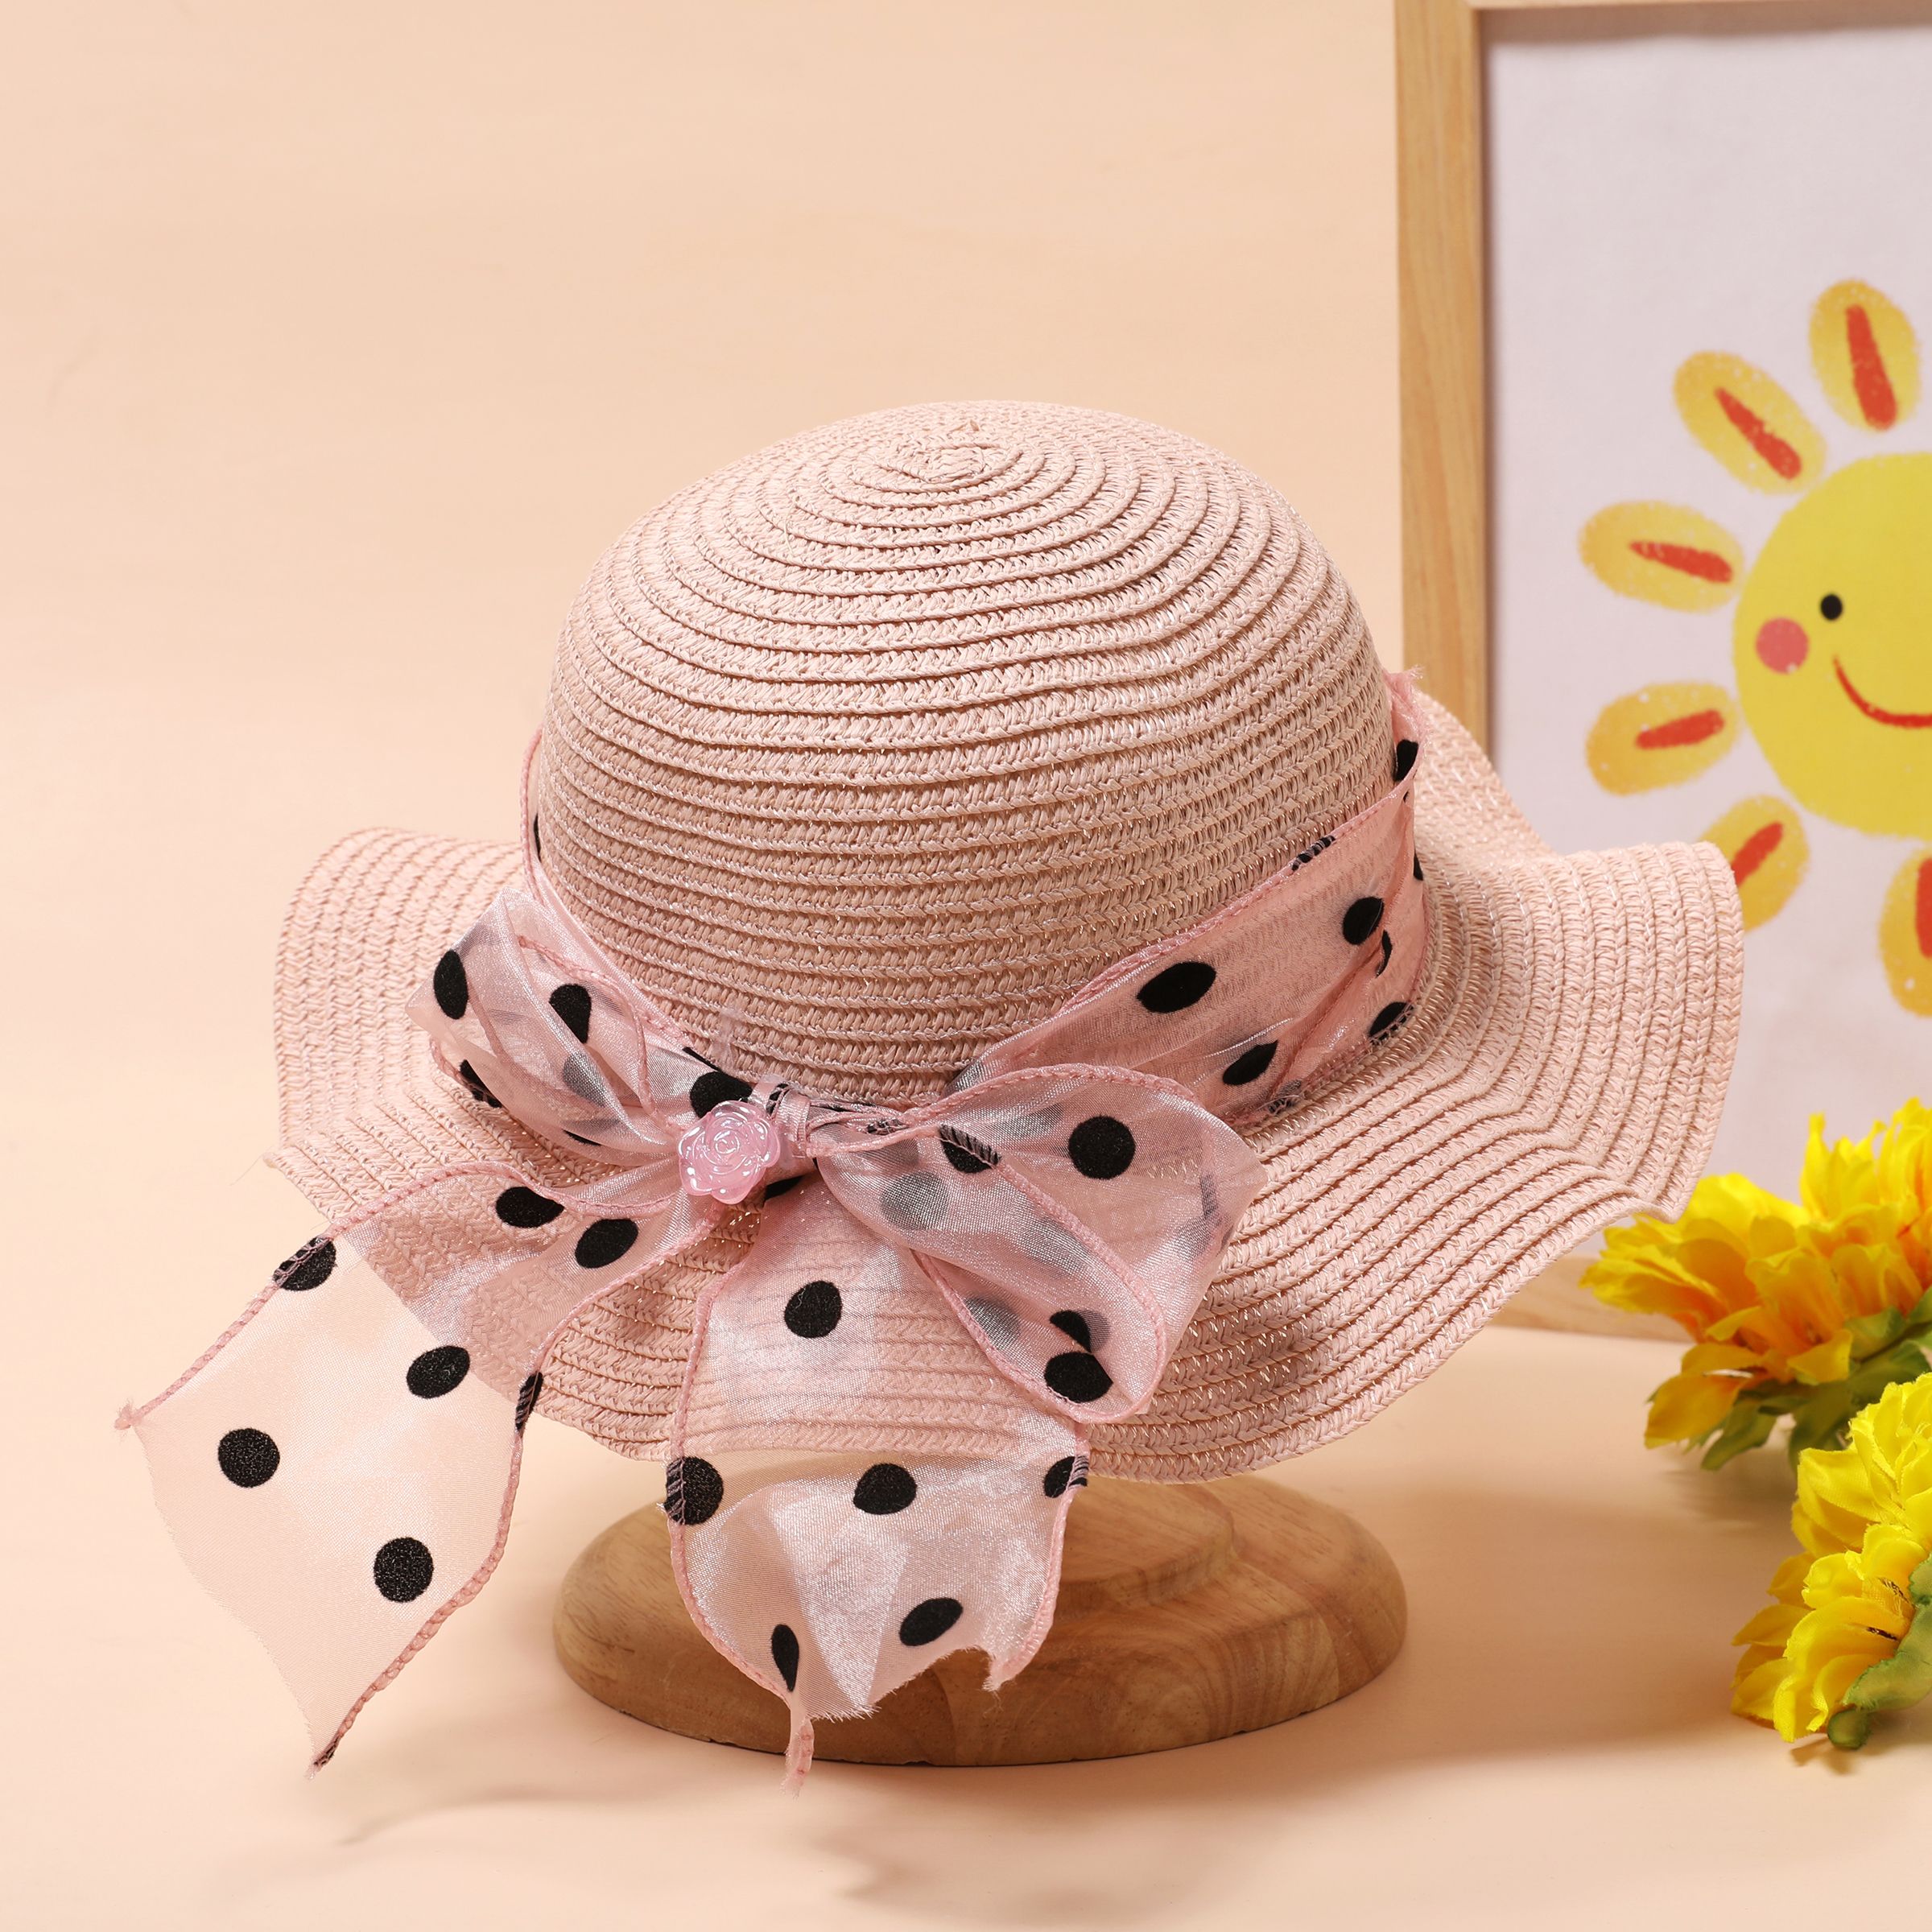 

Summer Girls' Straw Hat with Polka Dot Ribbon for Beach and Sun Protection, Ages 2-5